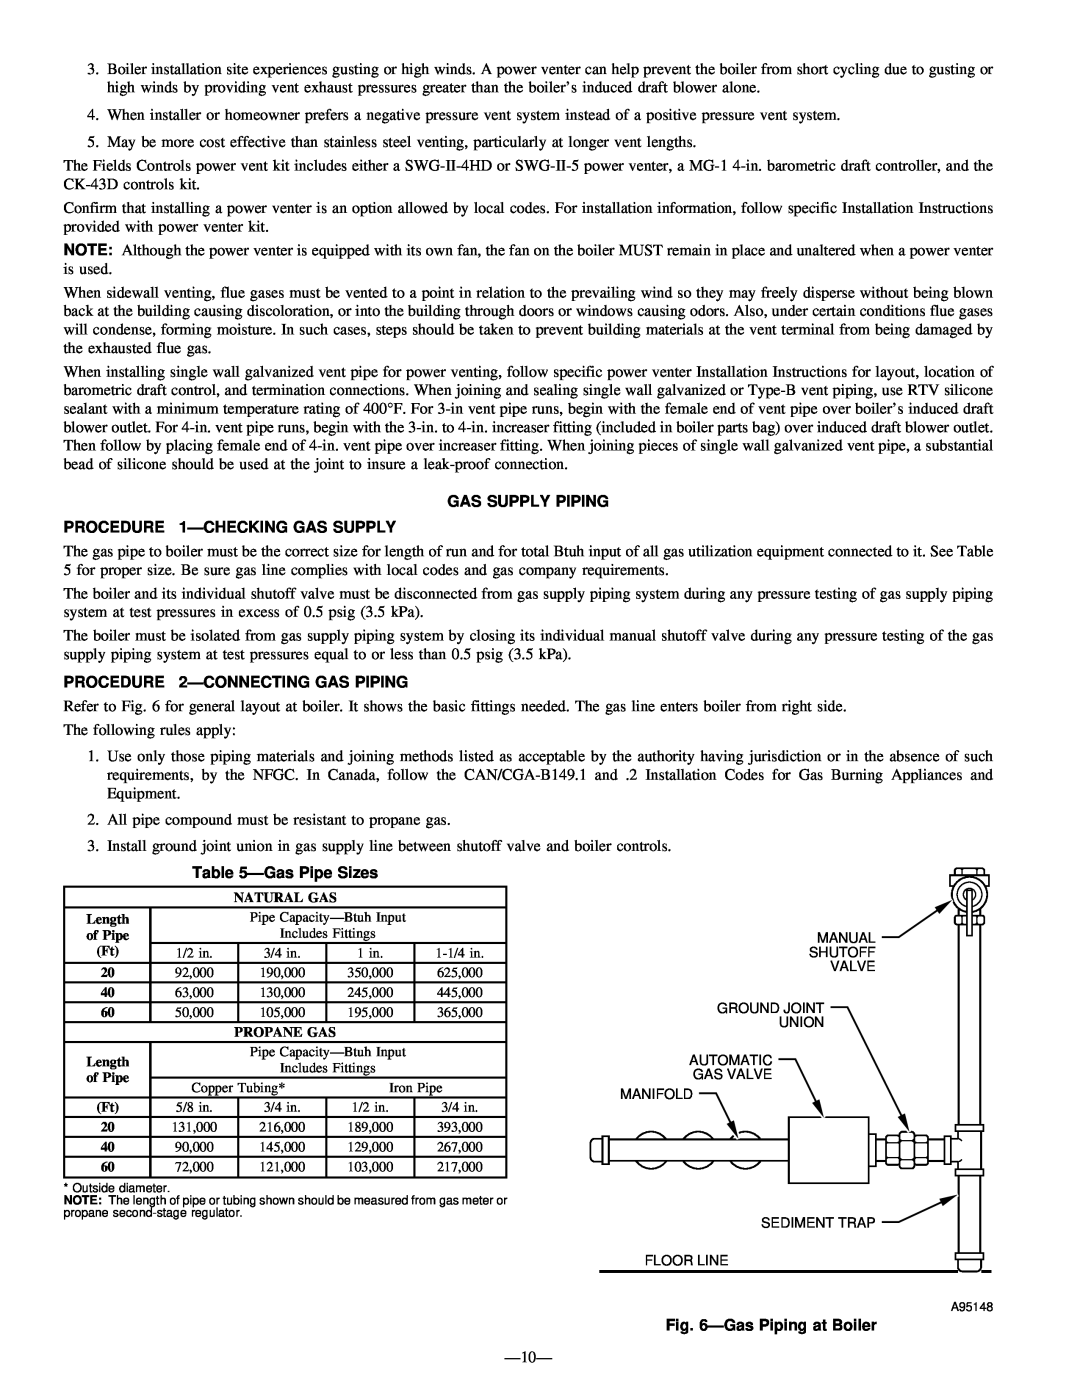 National Products Series B, BW3 GAS SUPPLY PIPING PROCEDURE 1ÐCHECKING GAS SUPPLY, PROCEDURE 2ÐCONNECTING GAS PIPING 